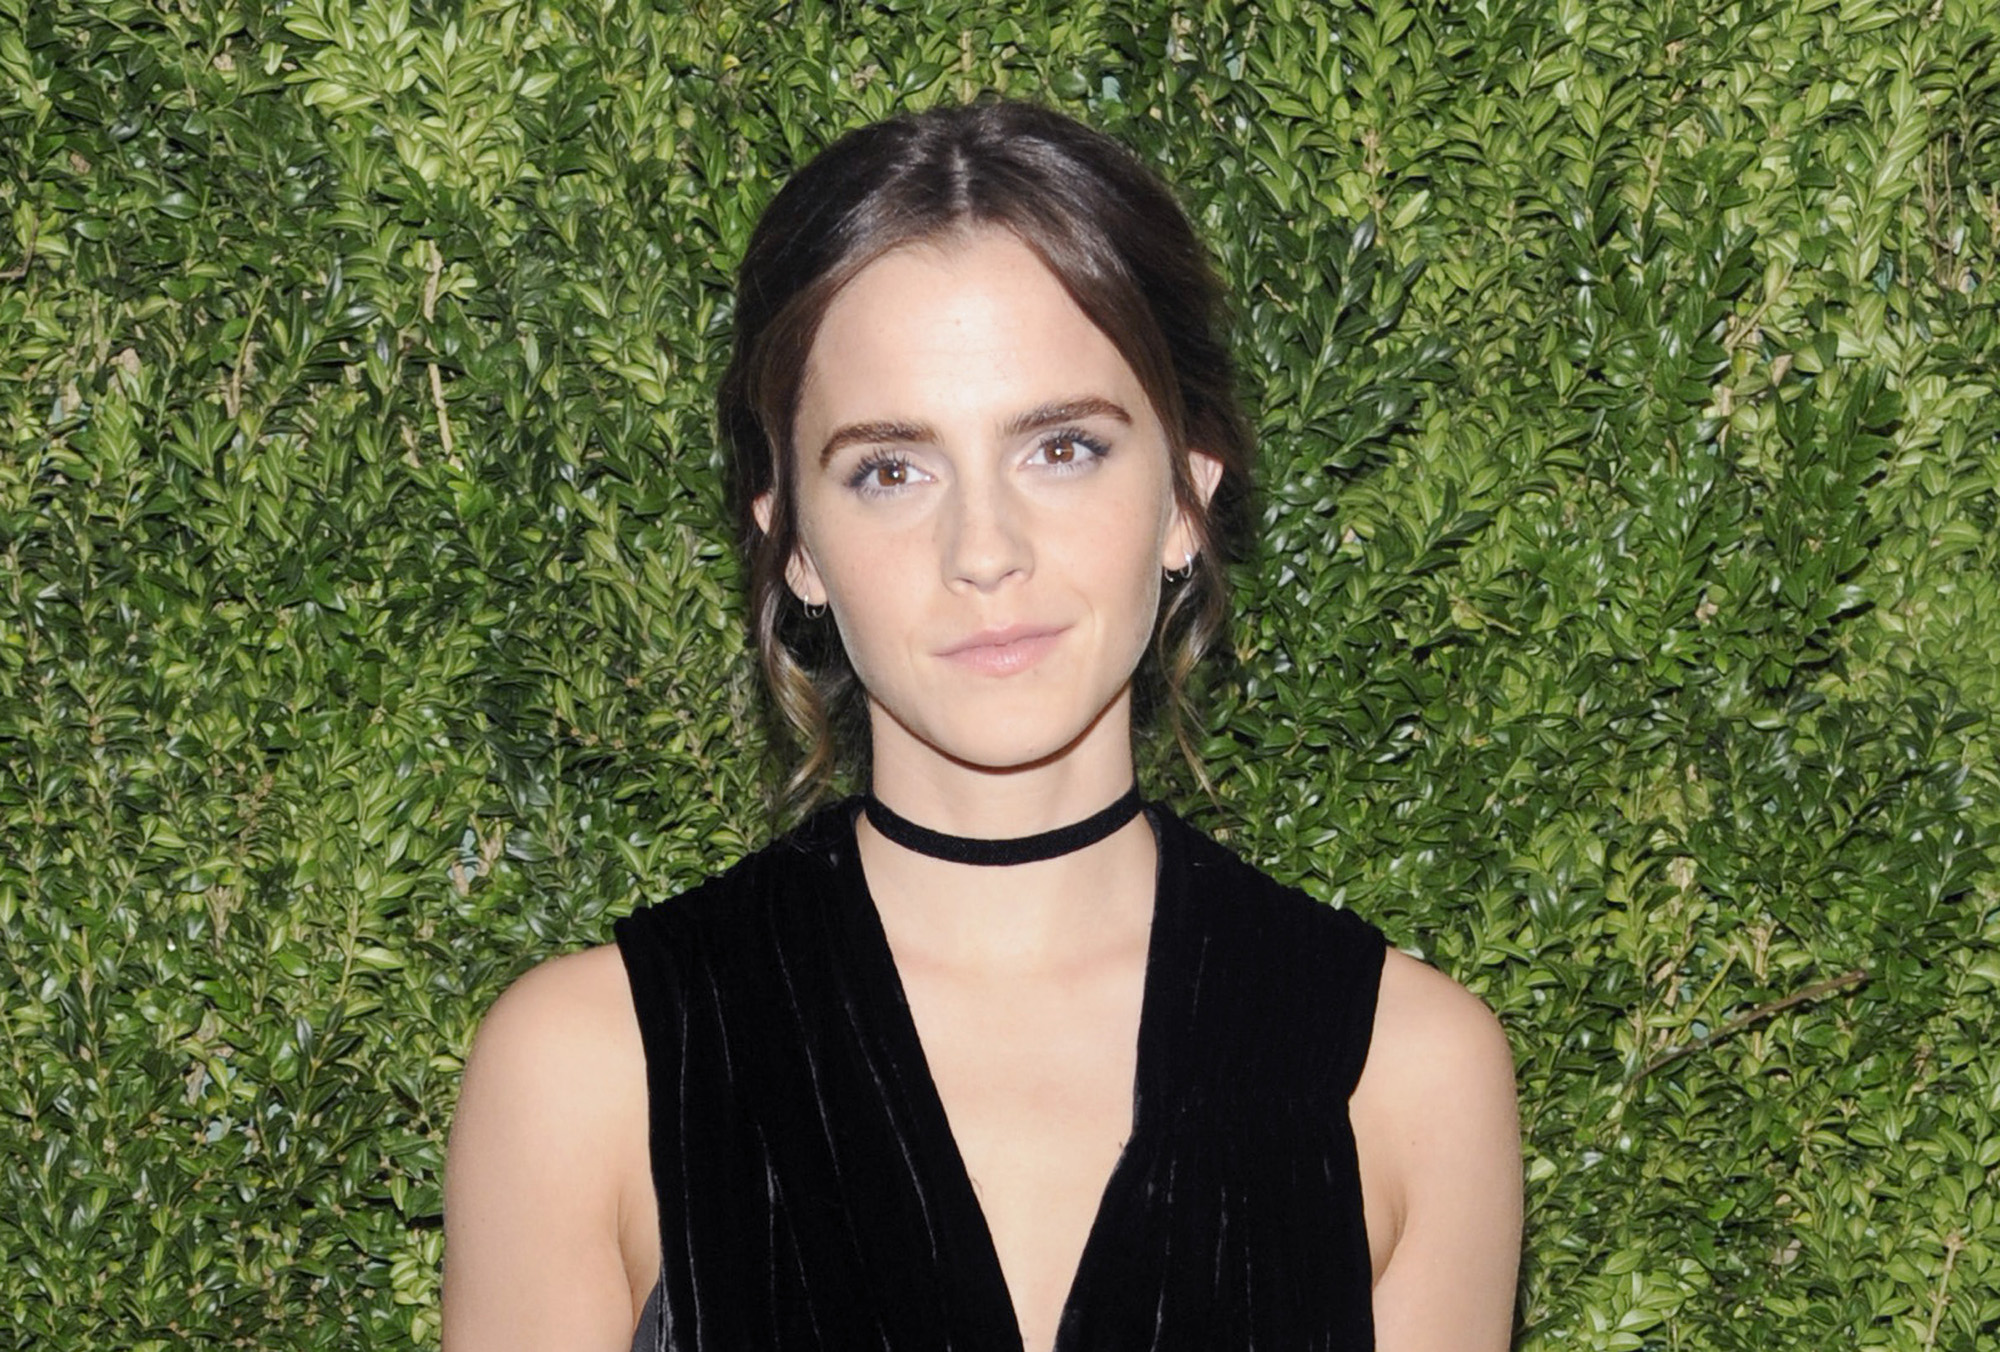 Emma Watson attends the 2016 Museum Of Modern Art Film Benefit on November 15, 2016 in New York City.  (Photo by Rabbani and Solimene Photography/Getty Images) (Rabbani and Solimene Photography&mdash;Getty Images)